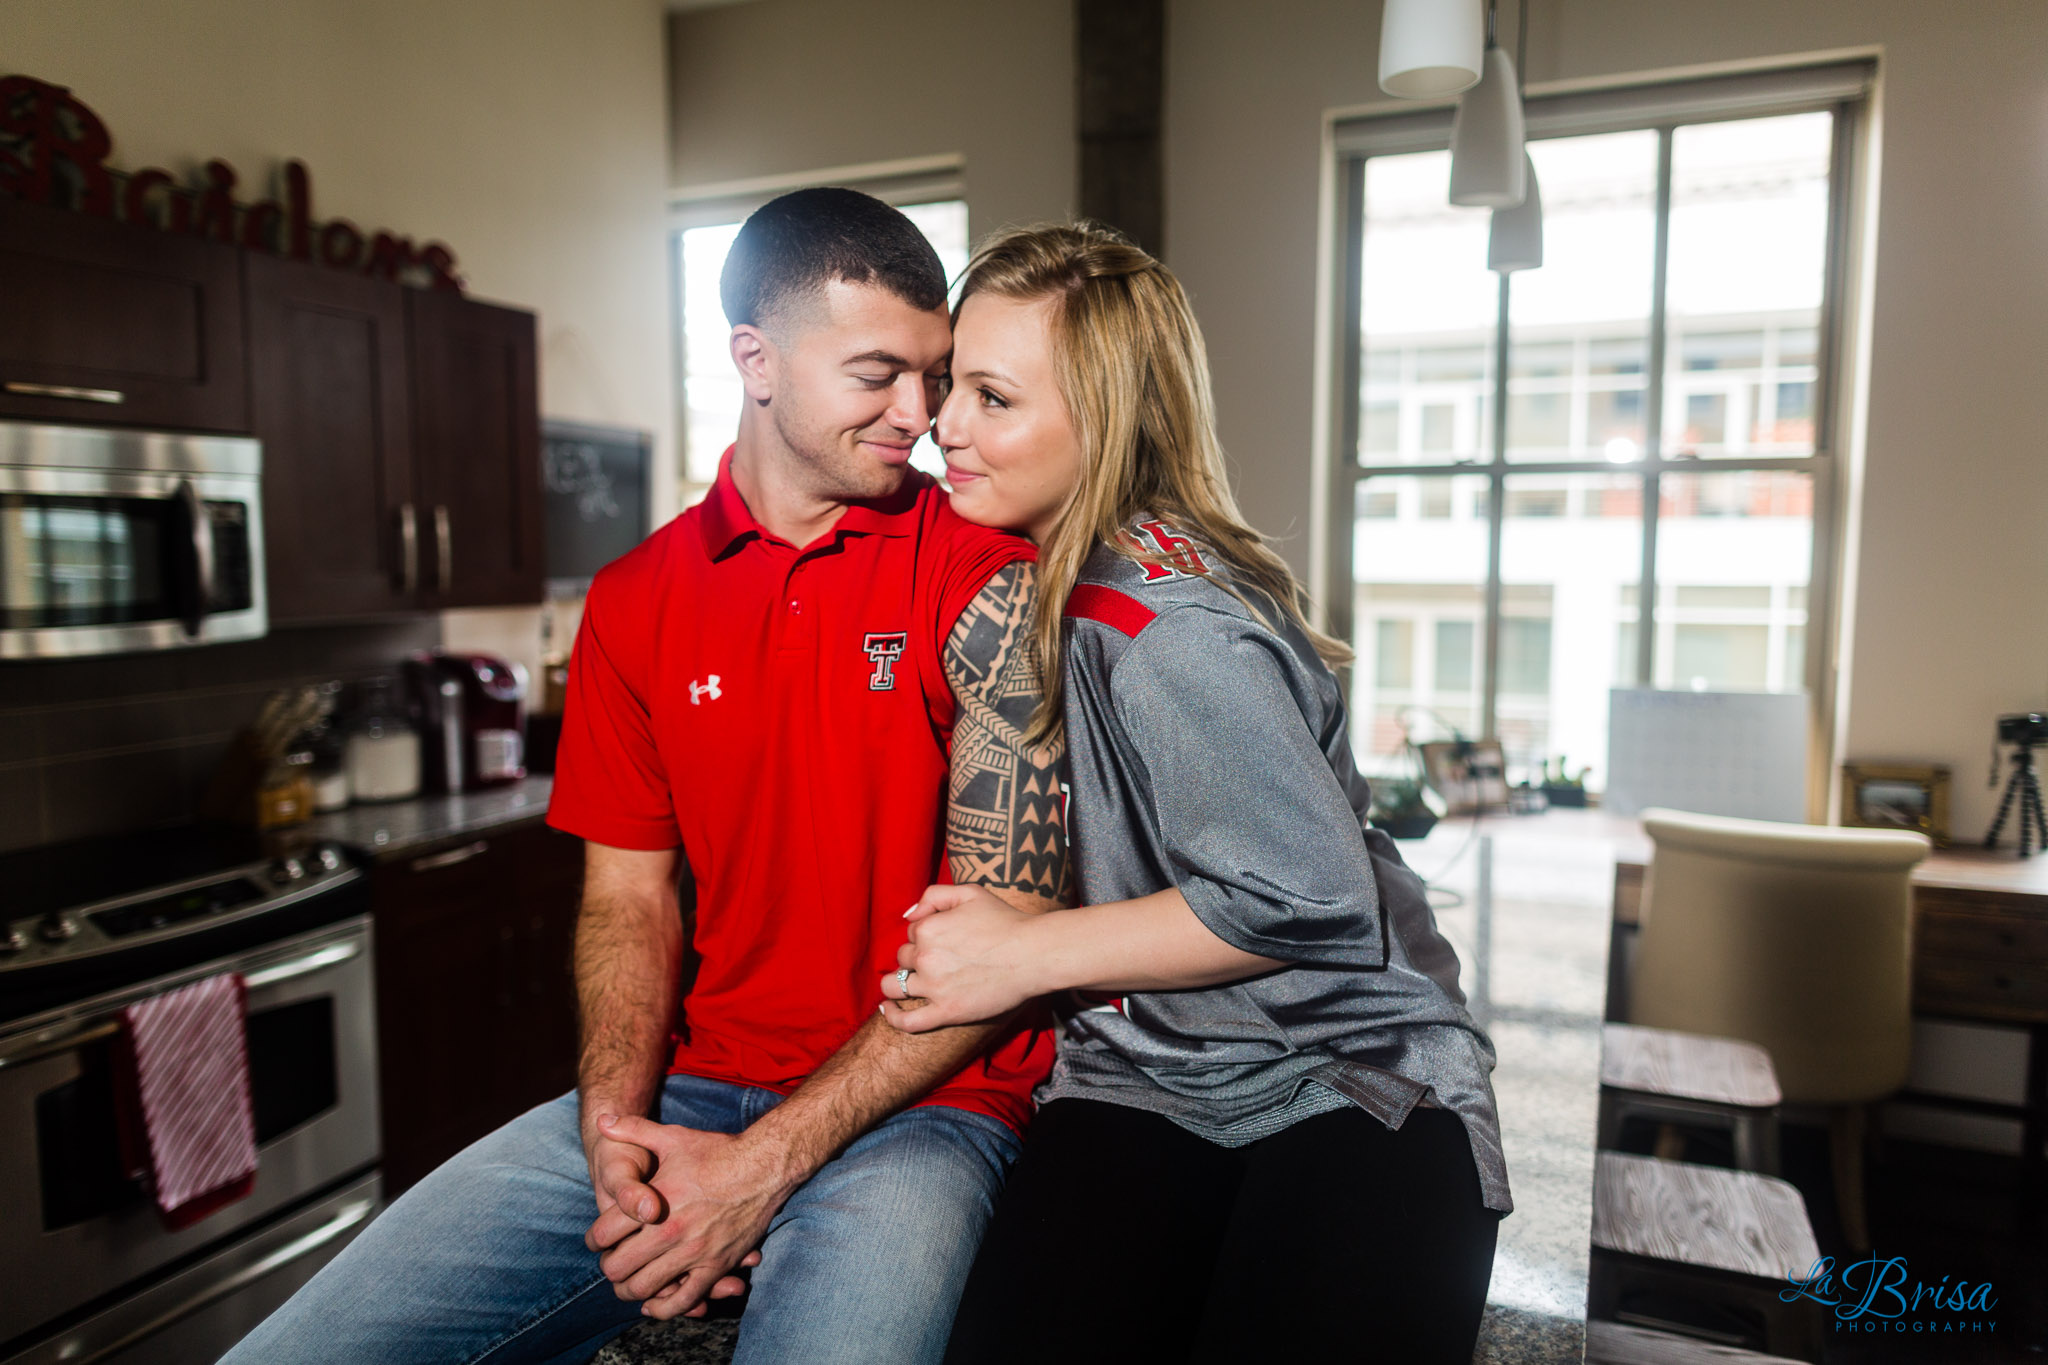 Texas Tech outfits sitting in kitchen engagement